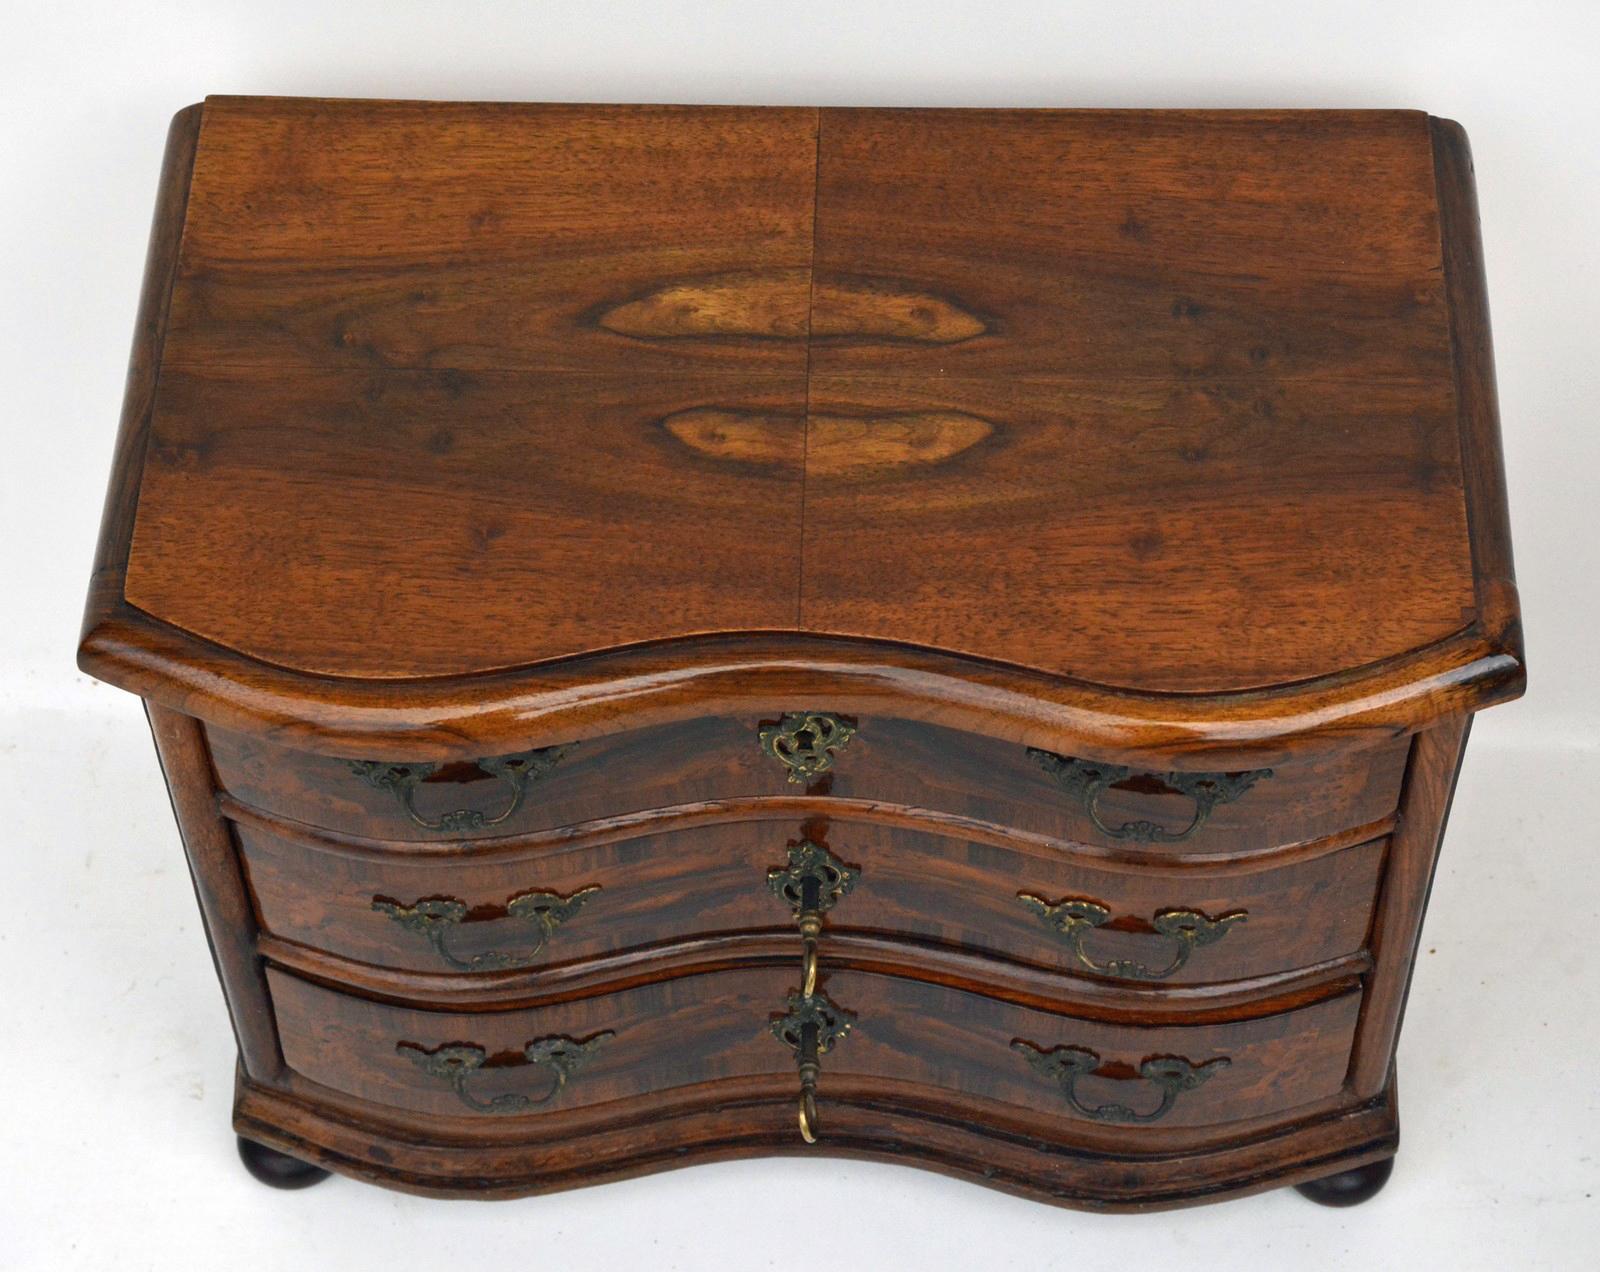 Model Furniture, Baroque dresser, 1750s. Made of walnut and other fine woods. A rare collector's item of high historical value. 

Pressed ball feet, double curved front with three drawers. Drawers and sides with fine ribbon and field marquetry. The